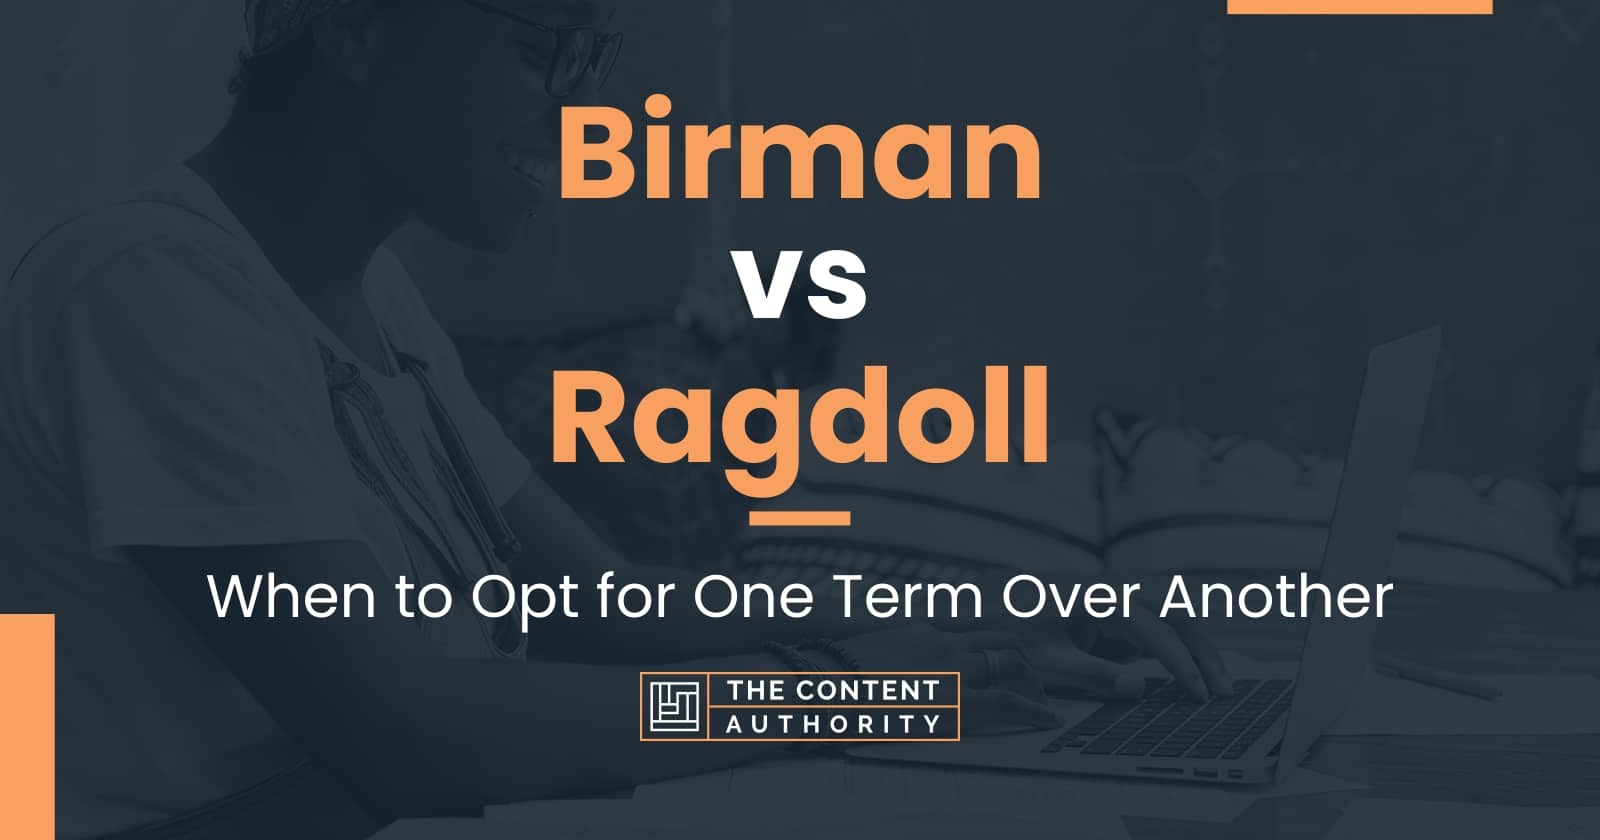 Birman vs Ragdoll: When to Opt for One Term Over Another